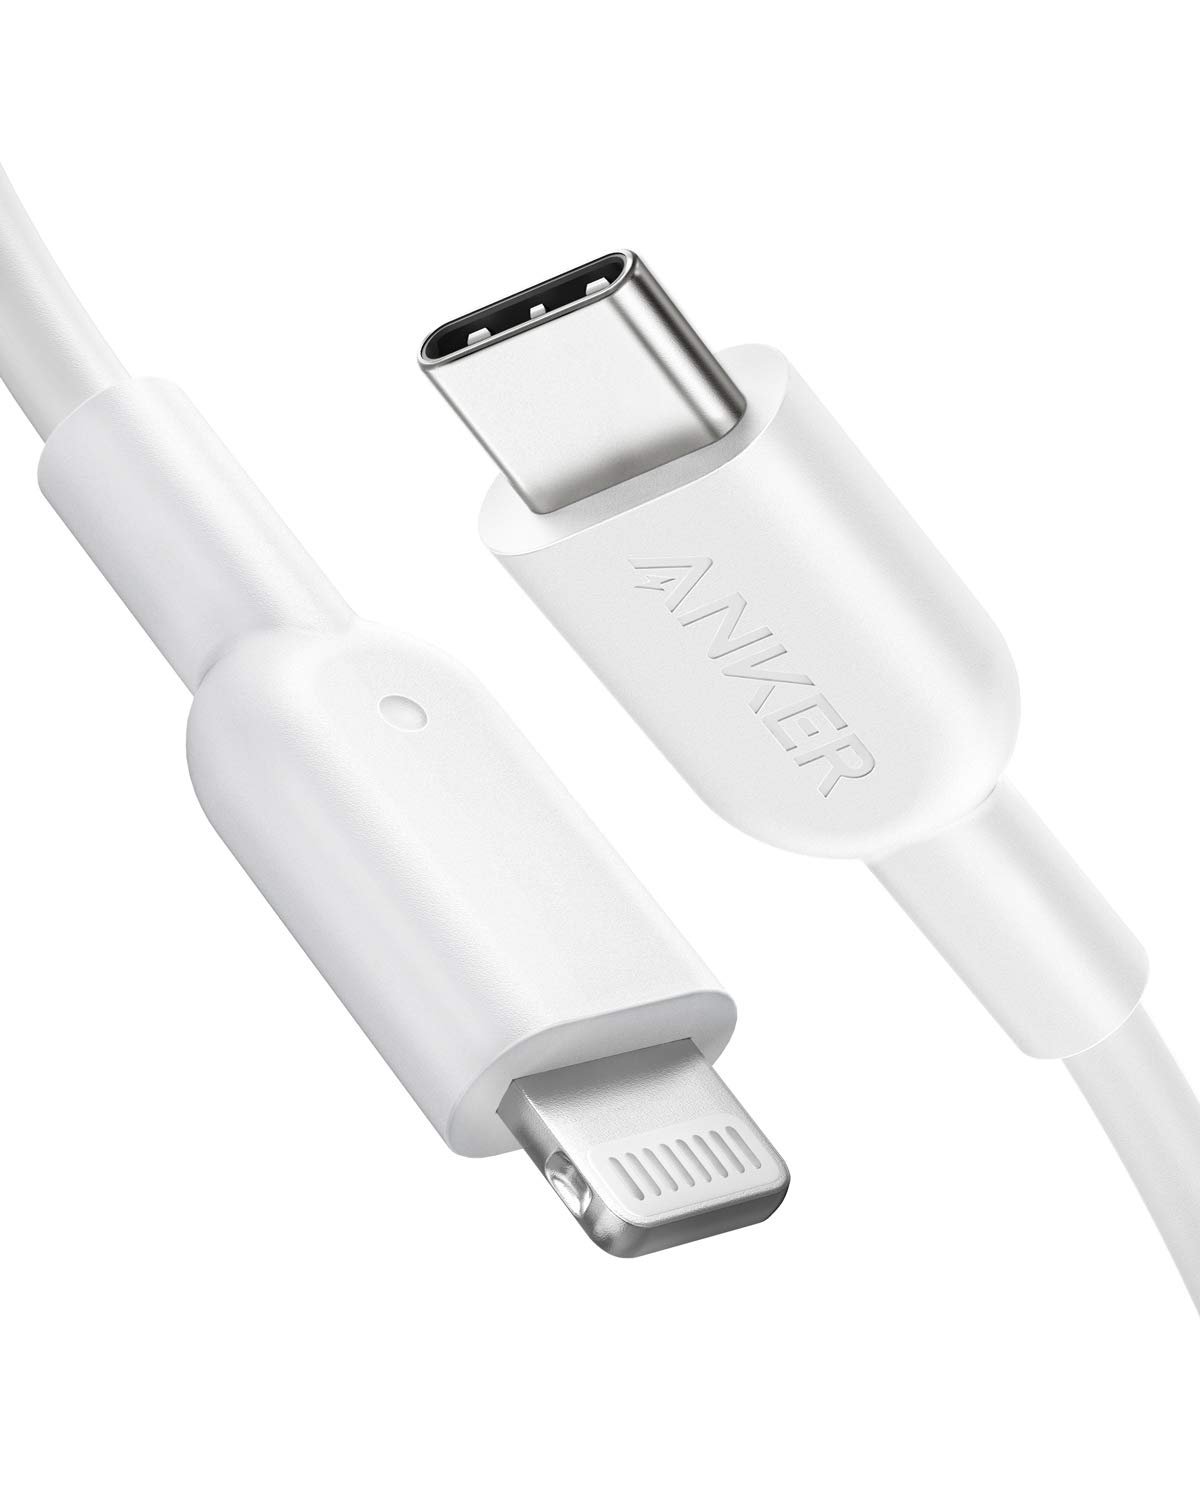 Book Cover Anker USB C to Lightning Cable, 321 (3ft,White), MFi Certified Cable for iPhone 13 Pro 12 Pro Max 12 11 X XS, AirPods Pro, Supports Power Delivery (Charger Not Included) 3ft White 1